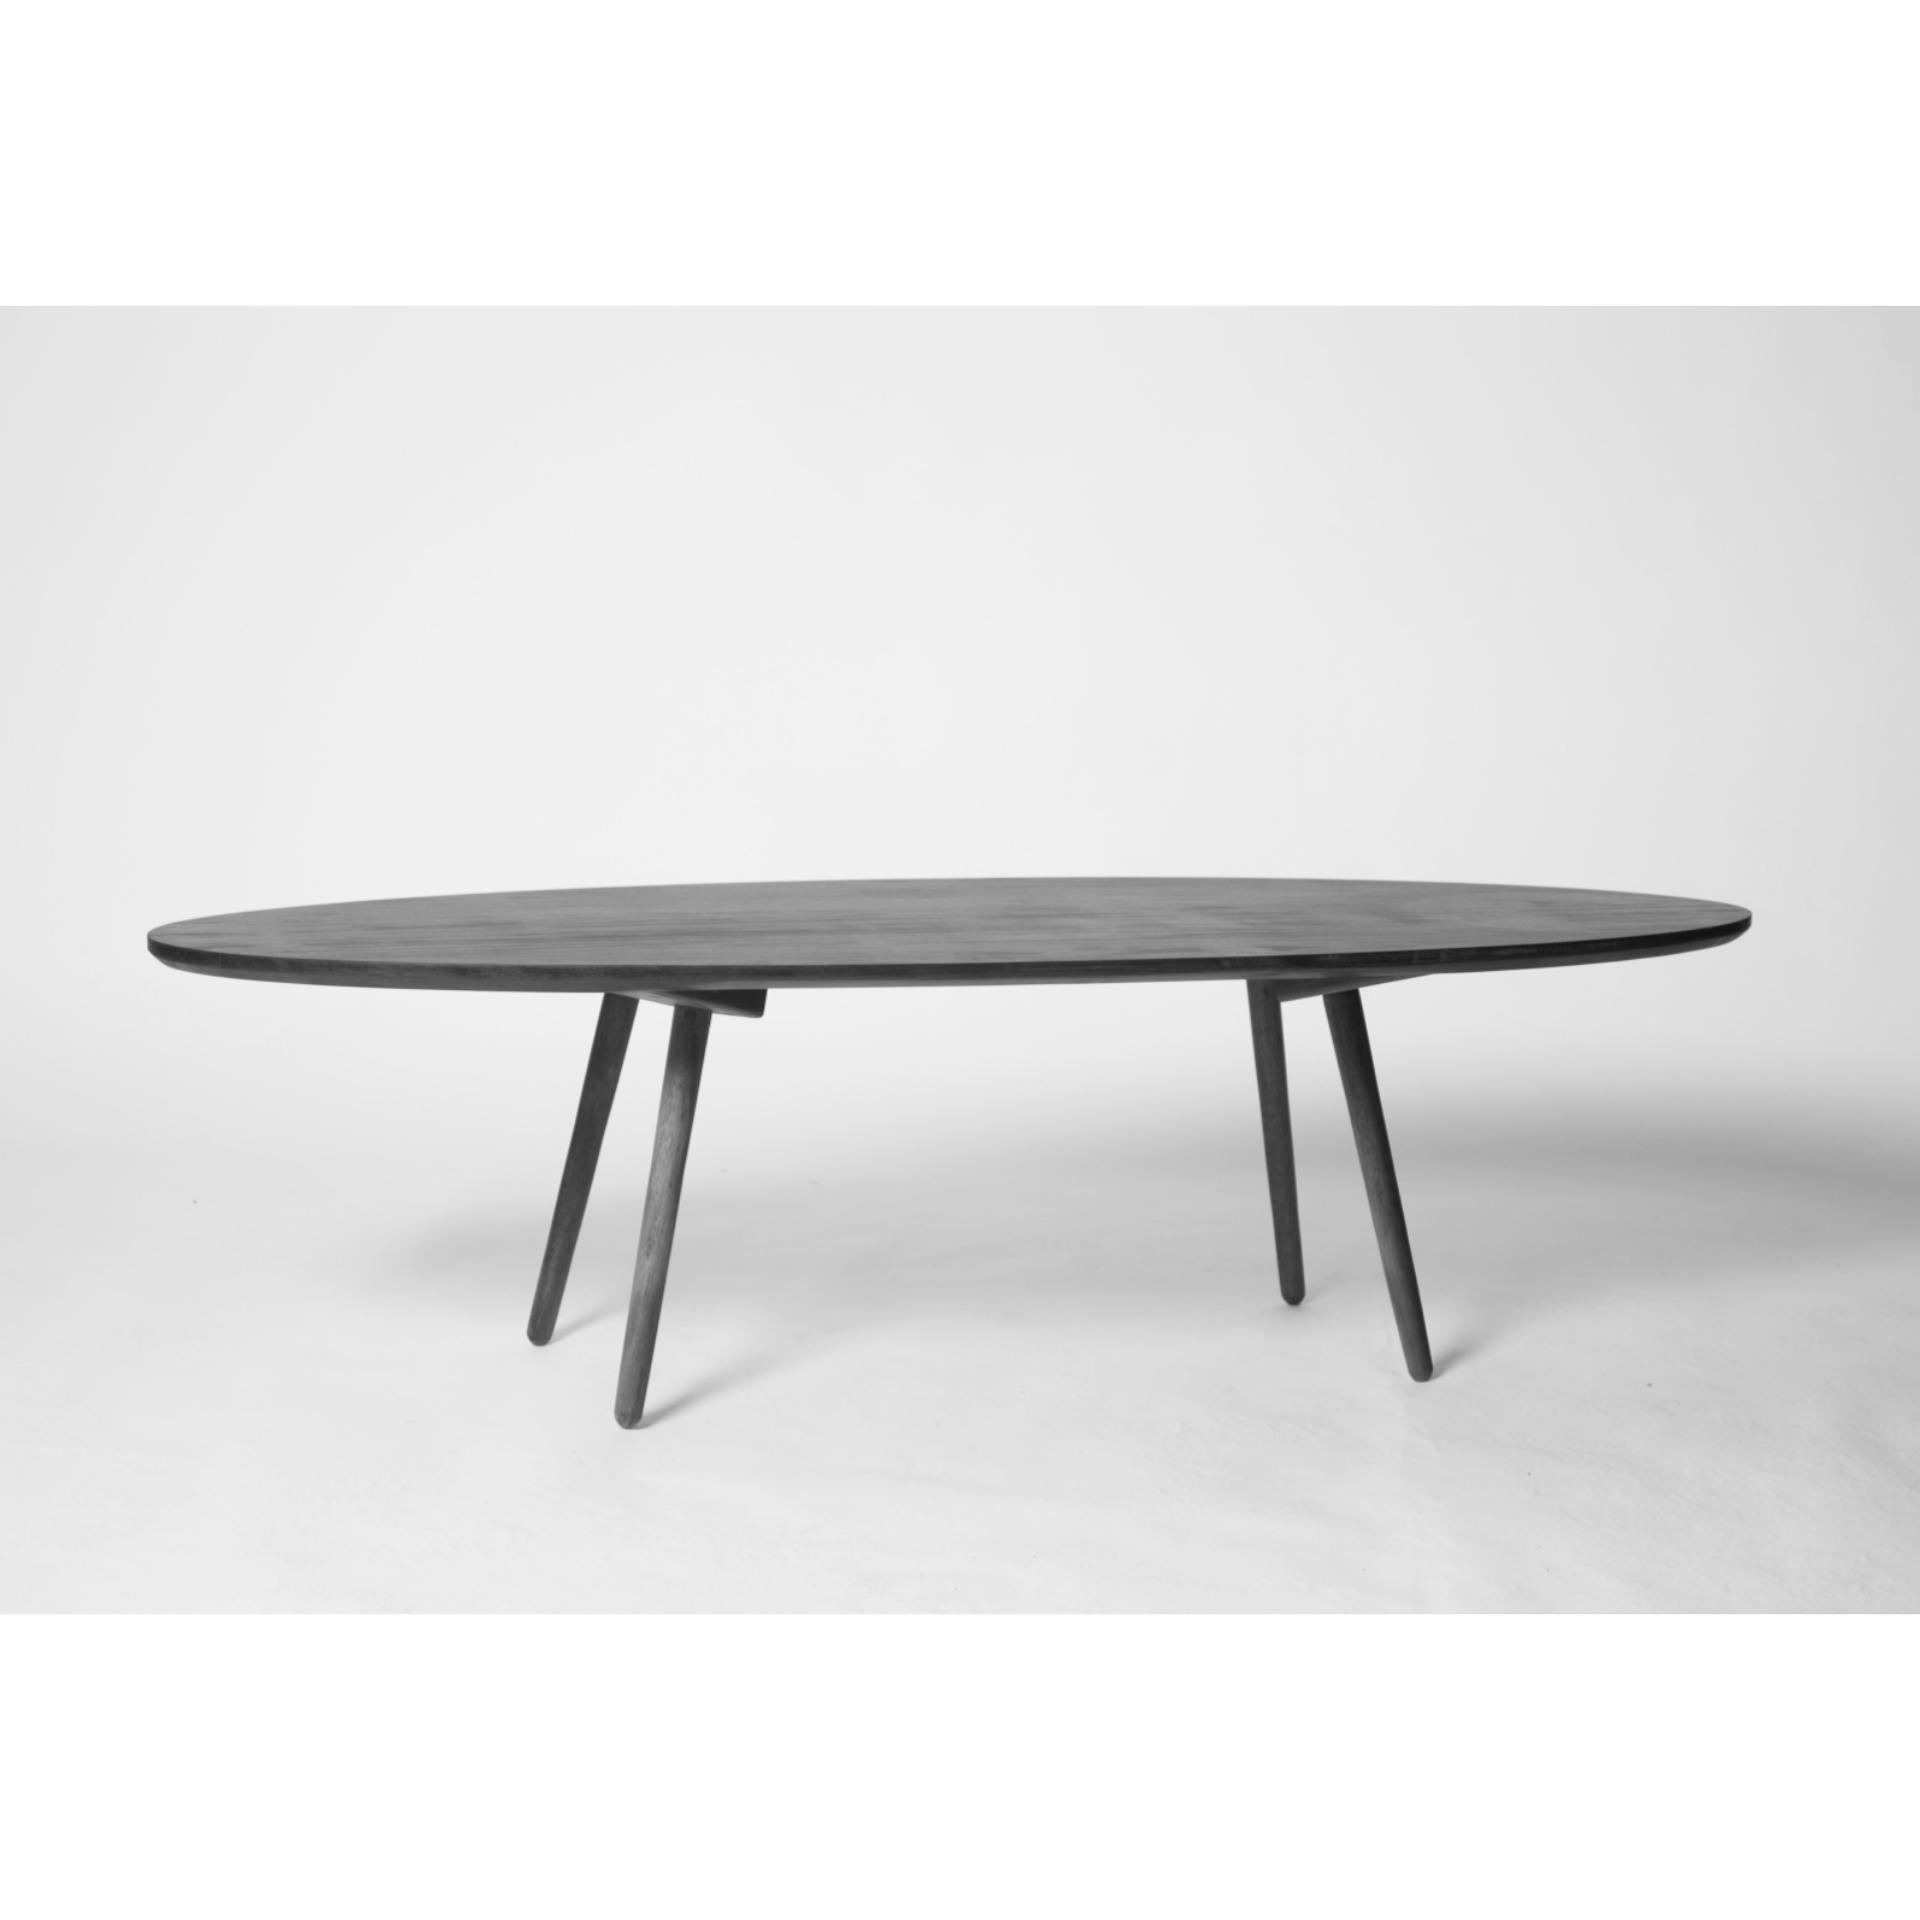 'Banquisa' Cofee Table - Brazilian design by André Bianco For Sale 2